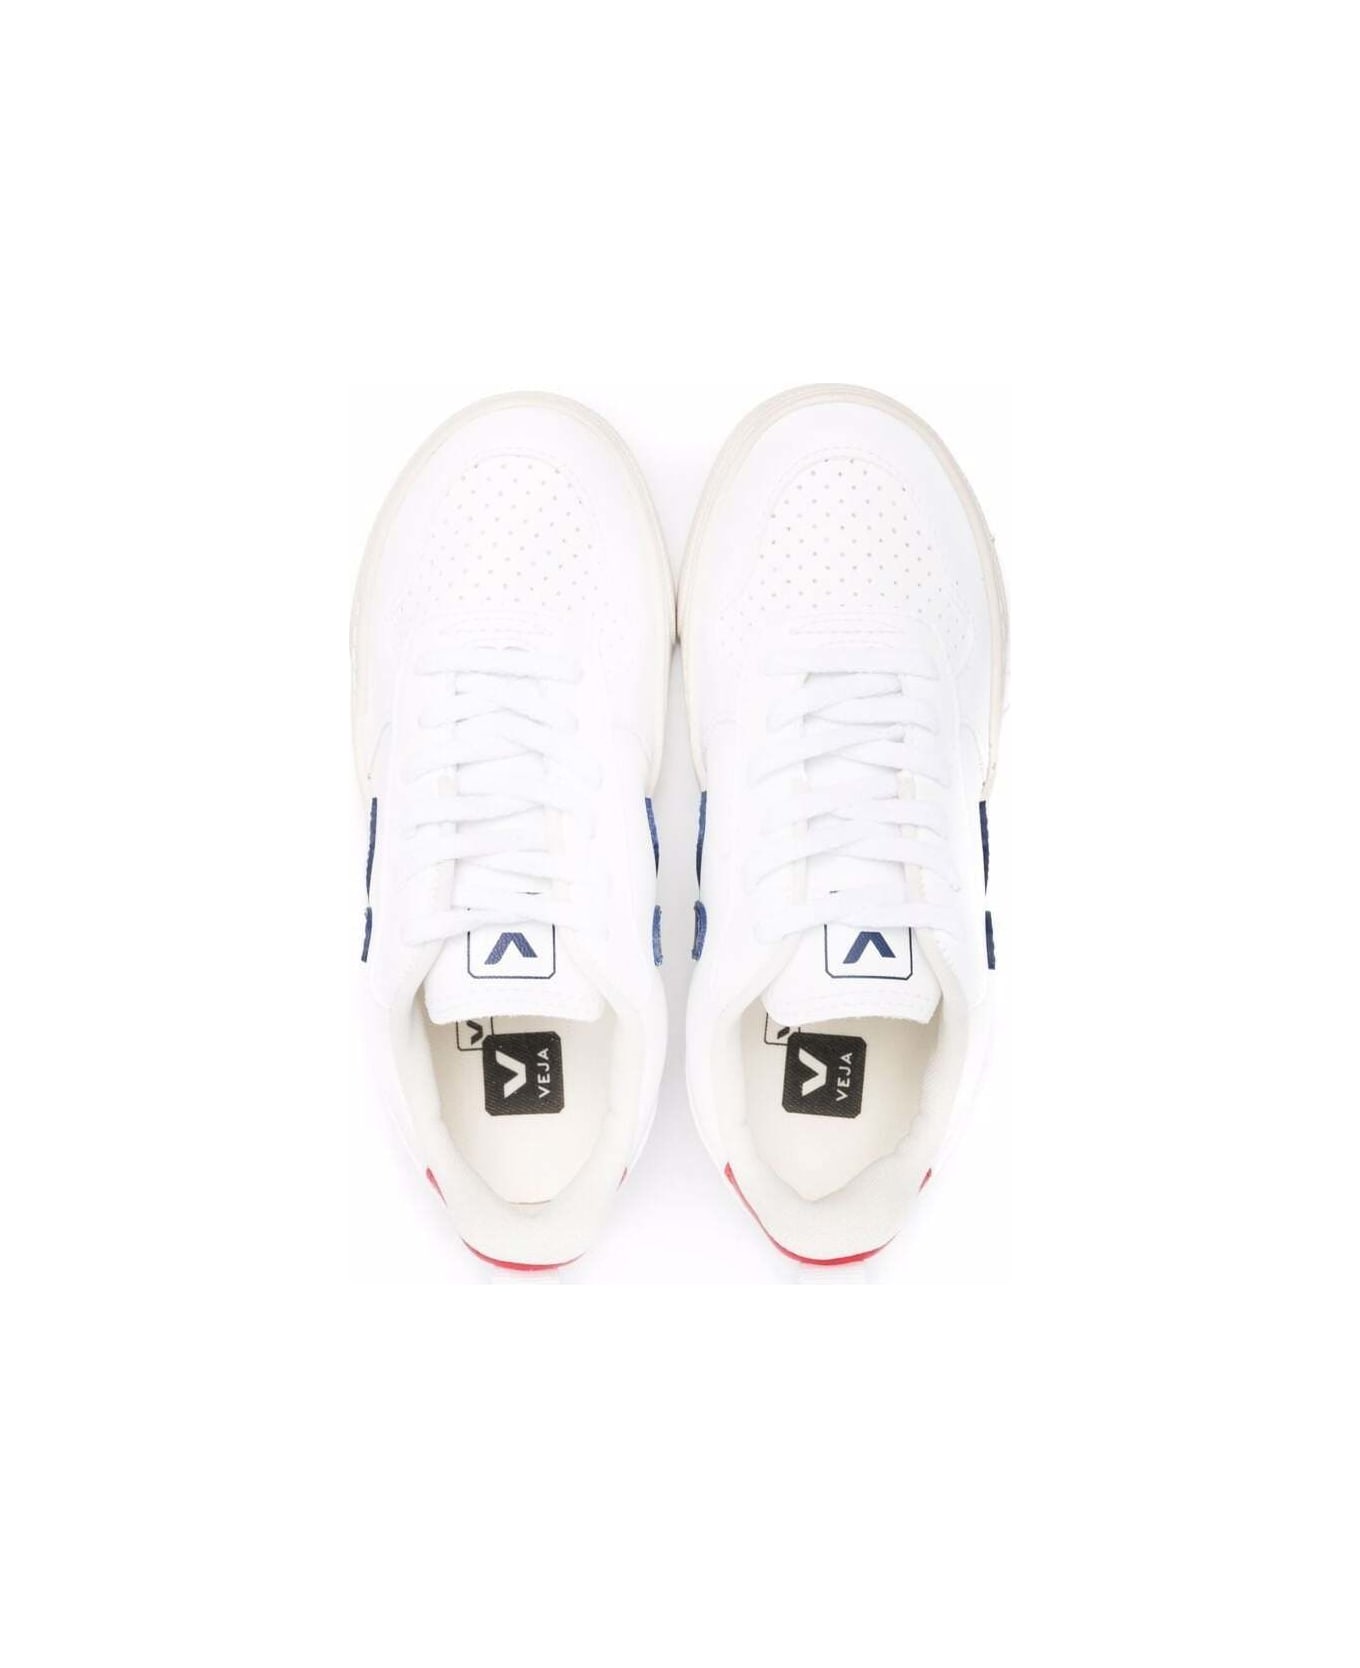 Veja Kids Boy's V-10 White Organic Cotton One of Americas most popular sneaker brands brings its affordable kicks to lower Manhattan - White